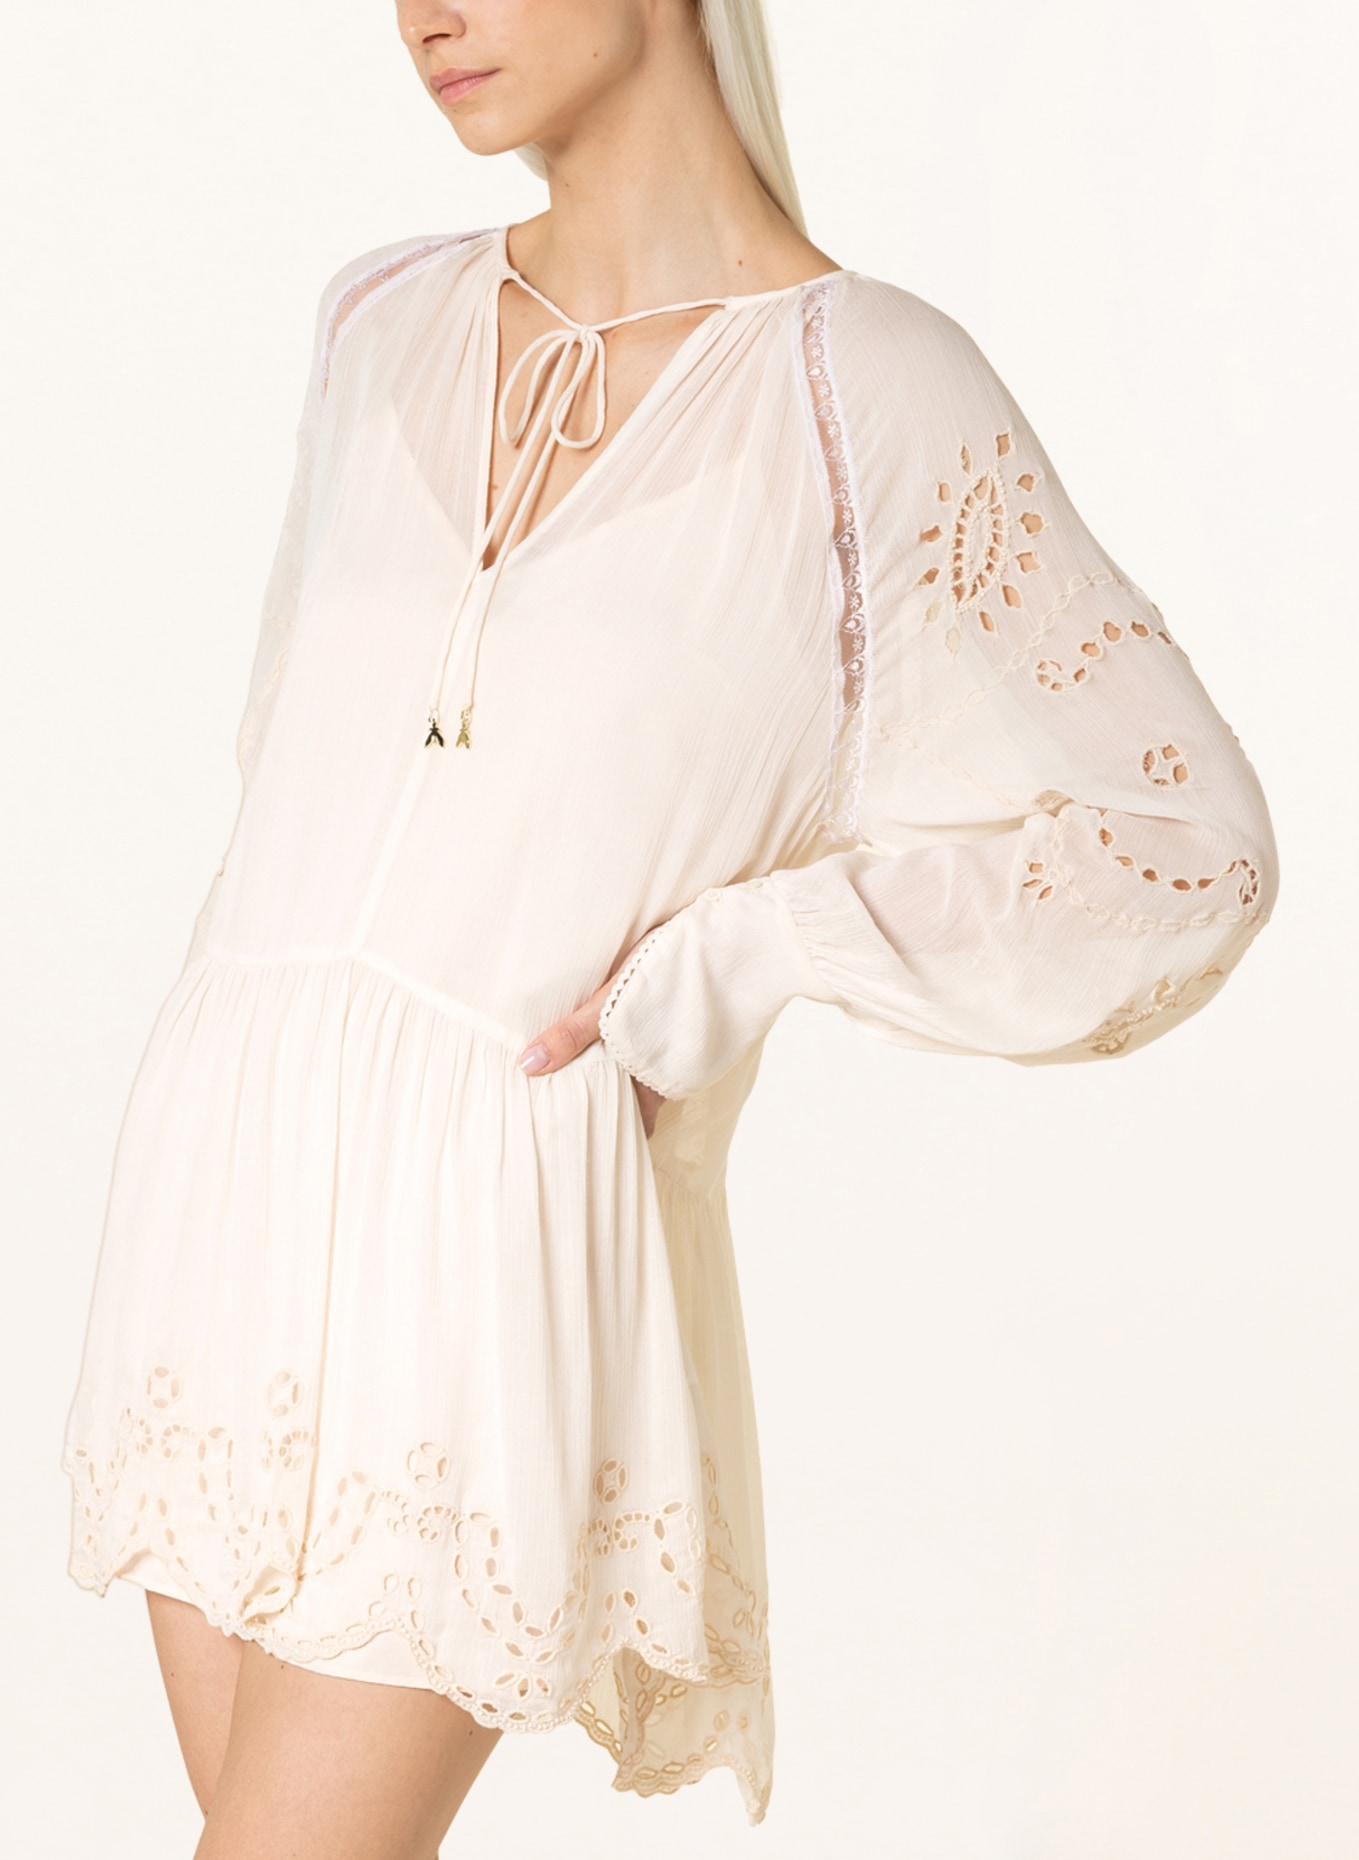 PATRIZIA PEPE Dress with decorative beads and lace , Color: CREAM (Image 5)